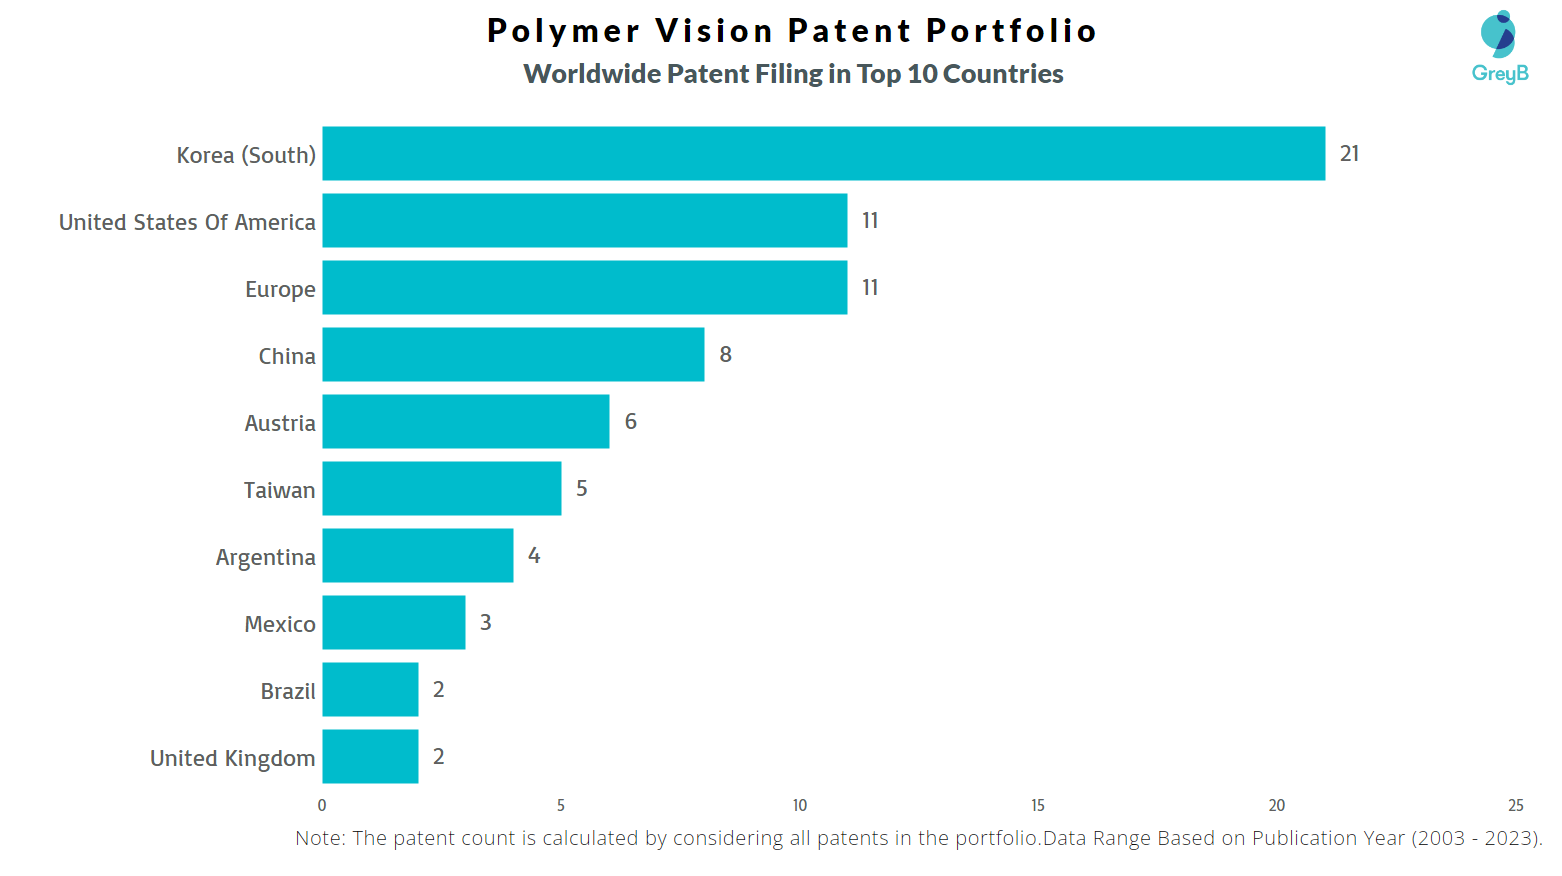 Polymer Vision Worldwide Patent Filing